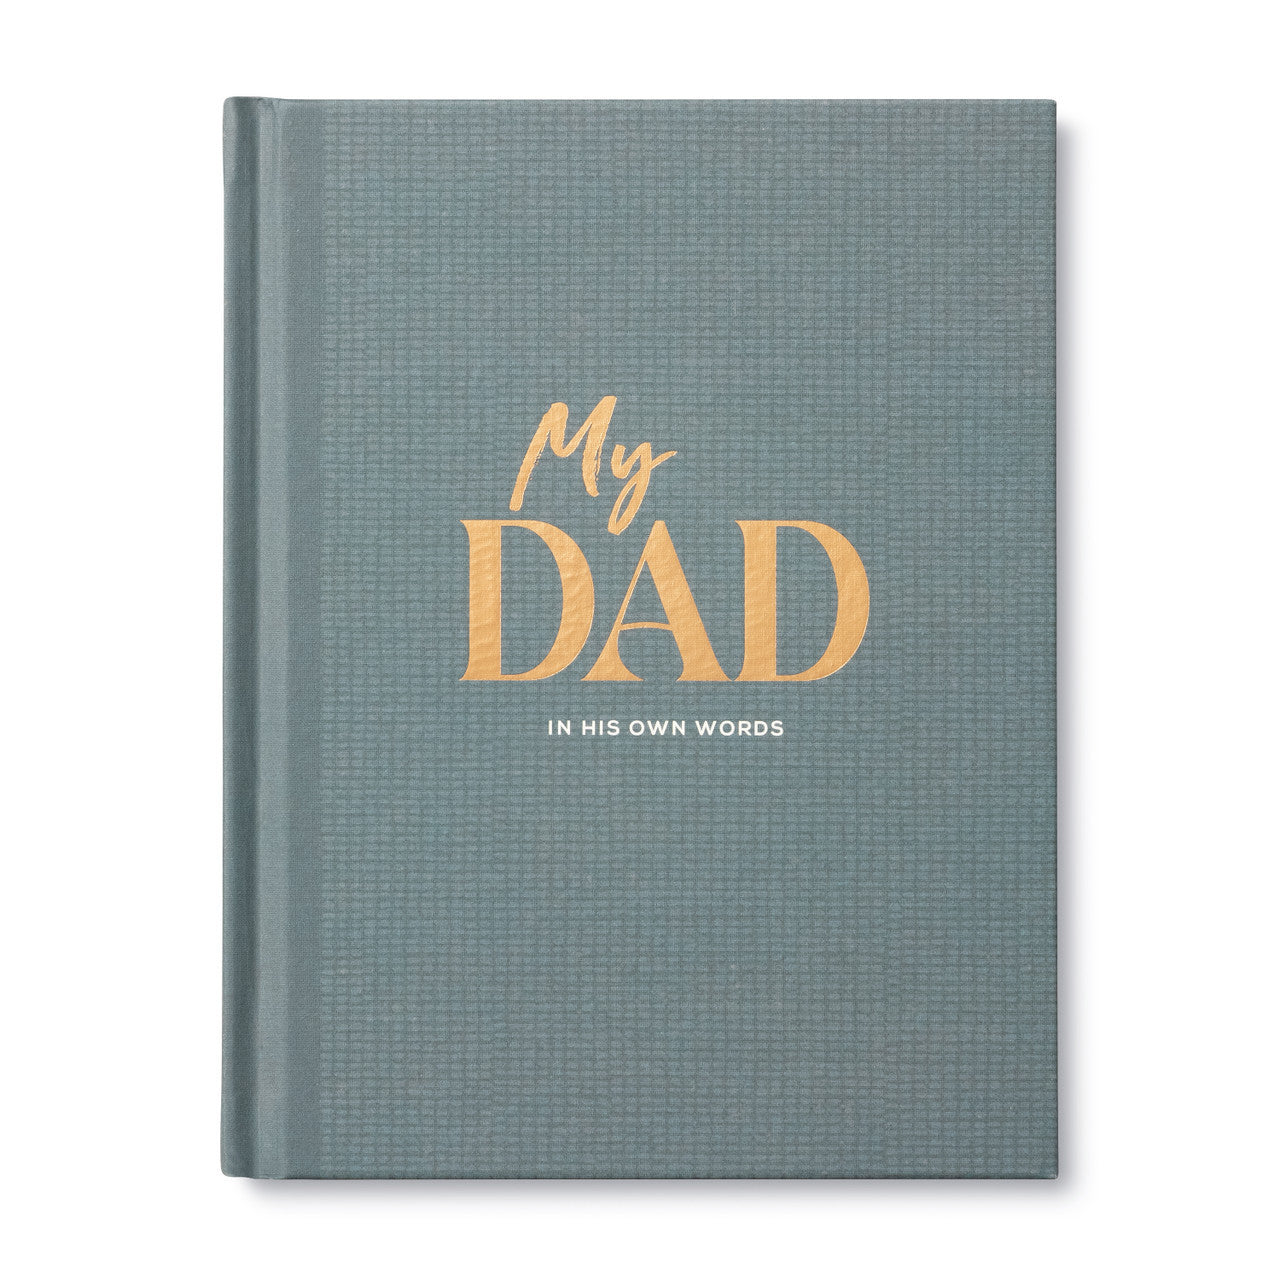 My Dad in His Own Words Book